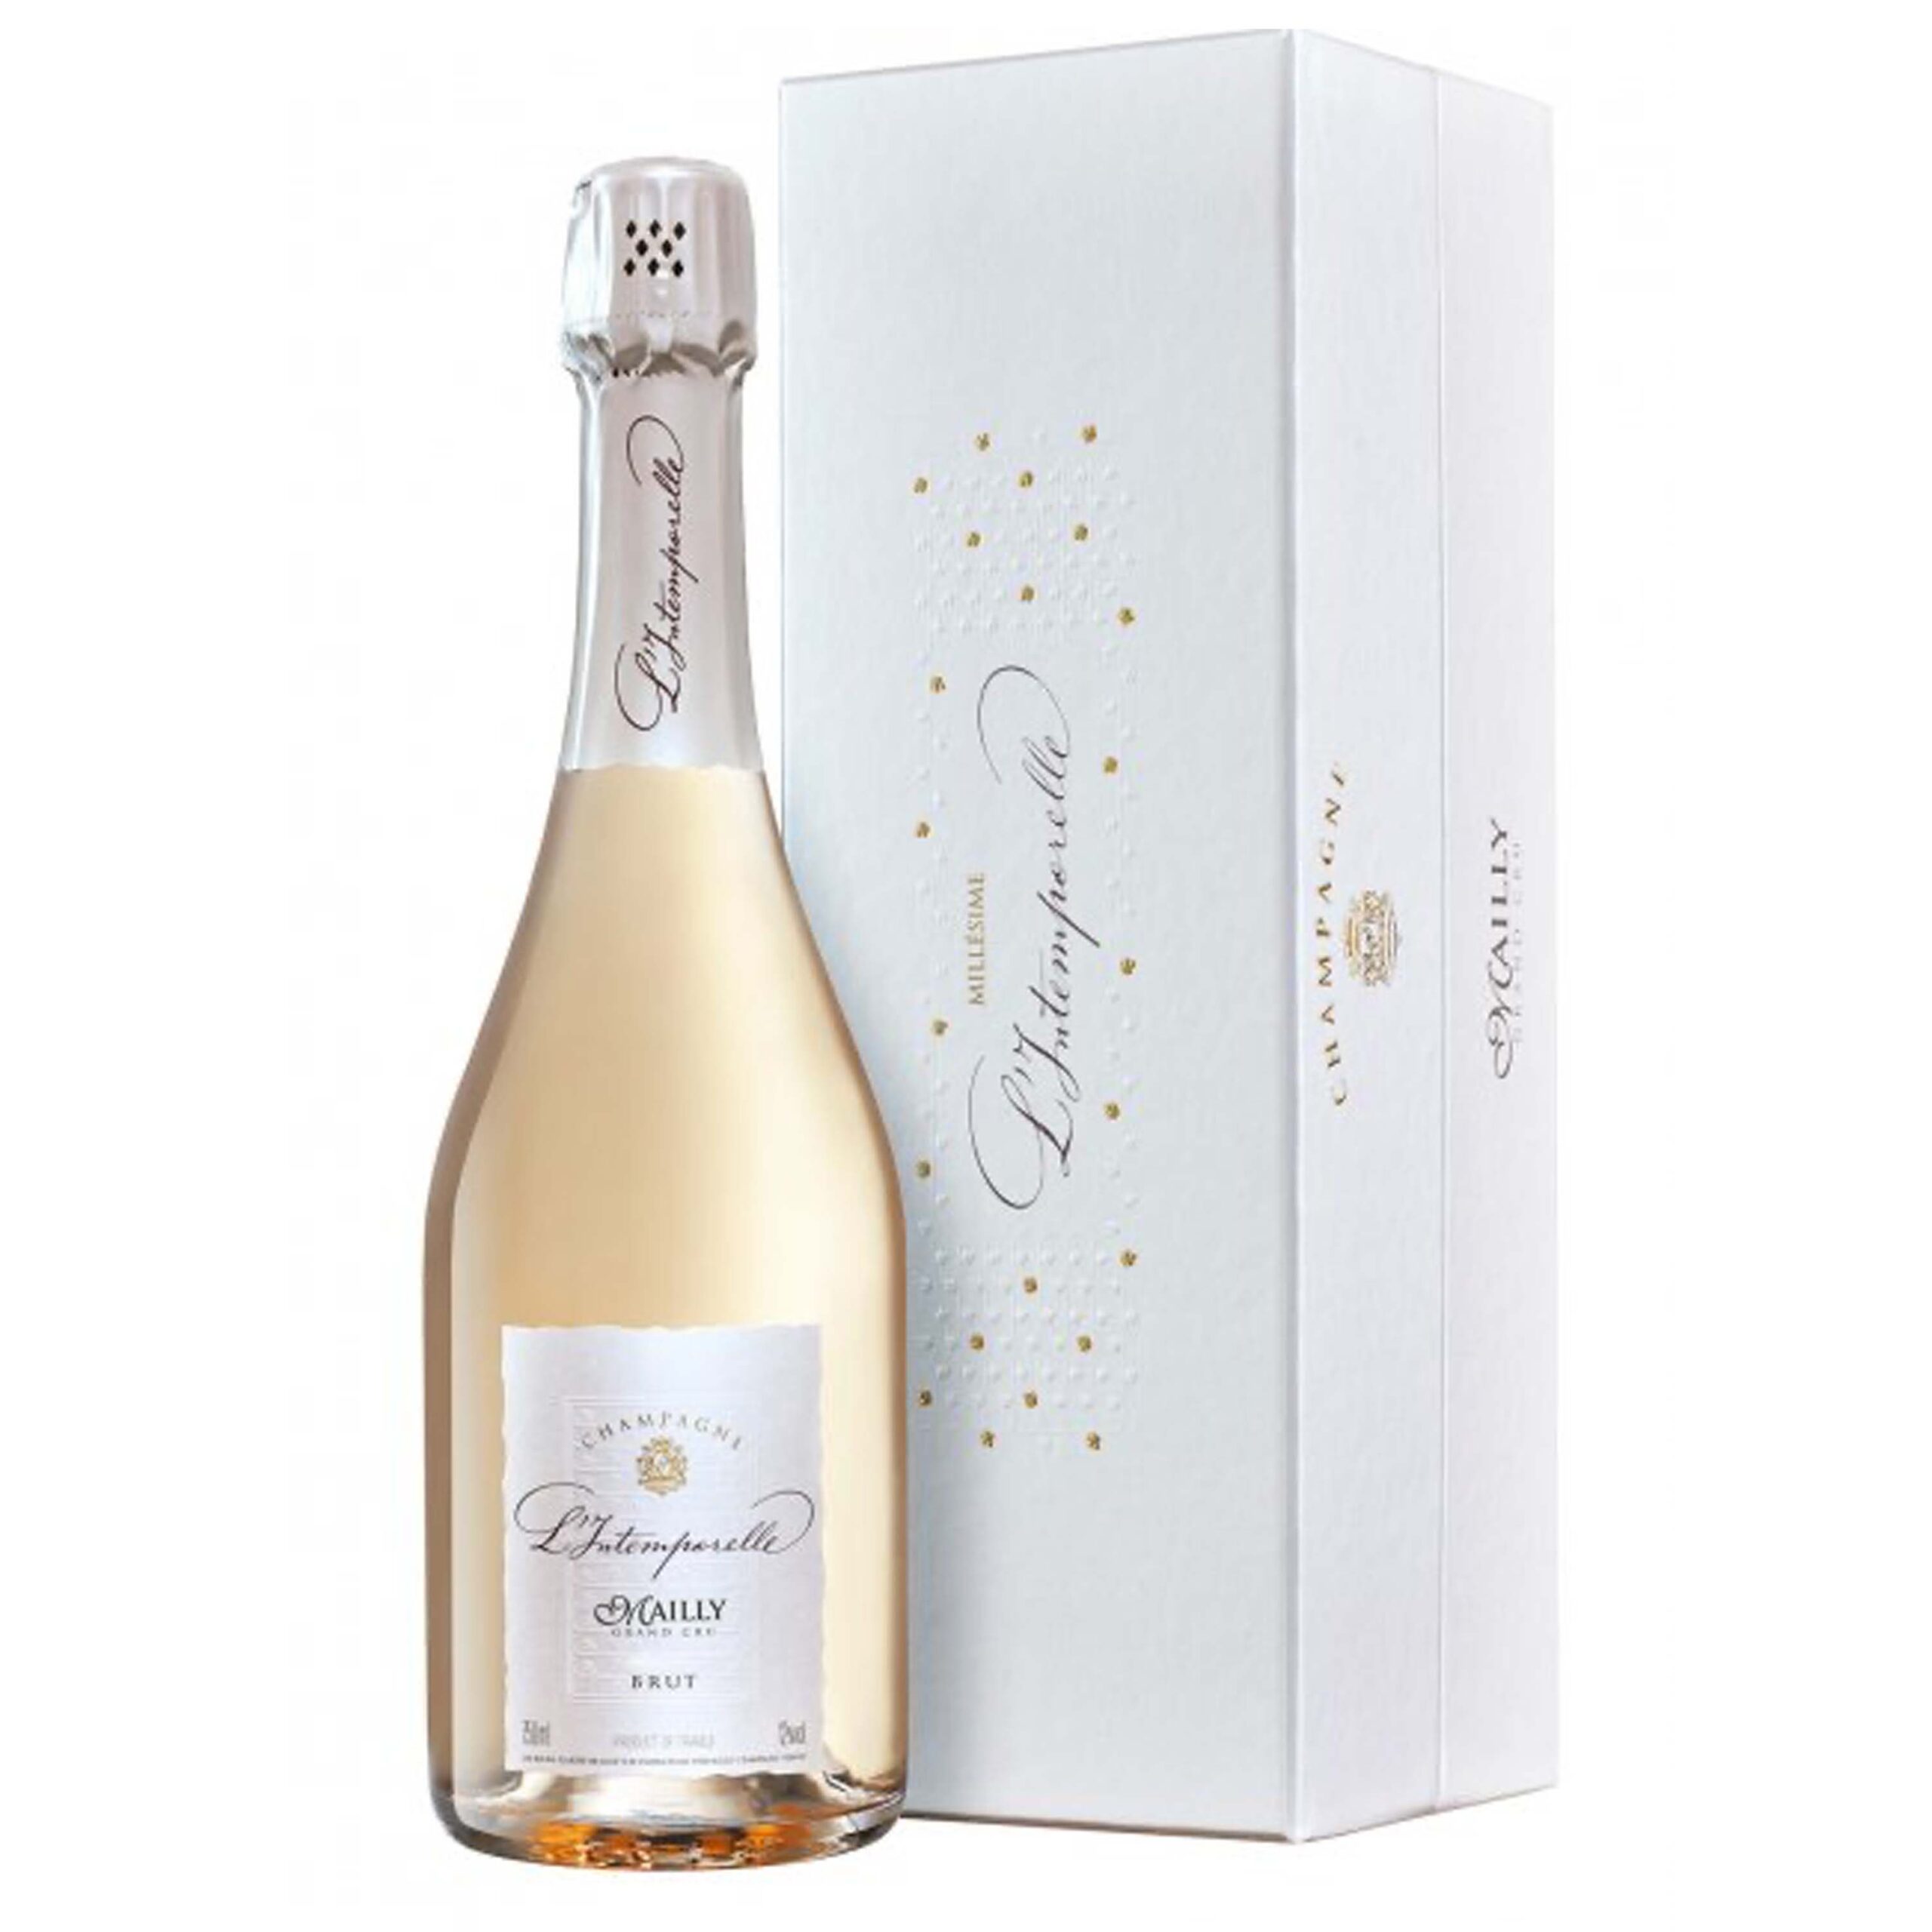 Mailly Grand Cru Champagne Gift with 2 Glasses